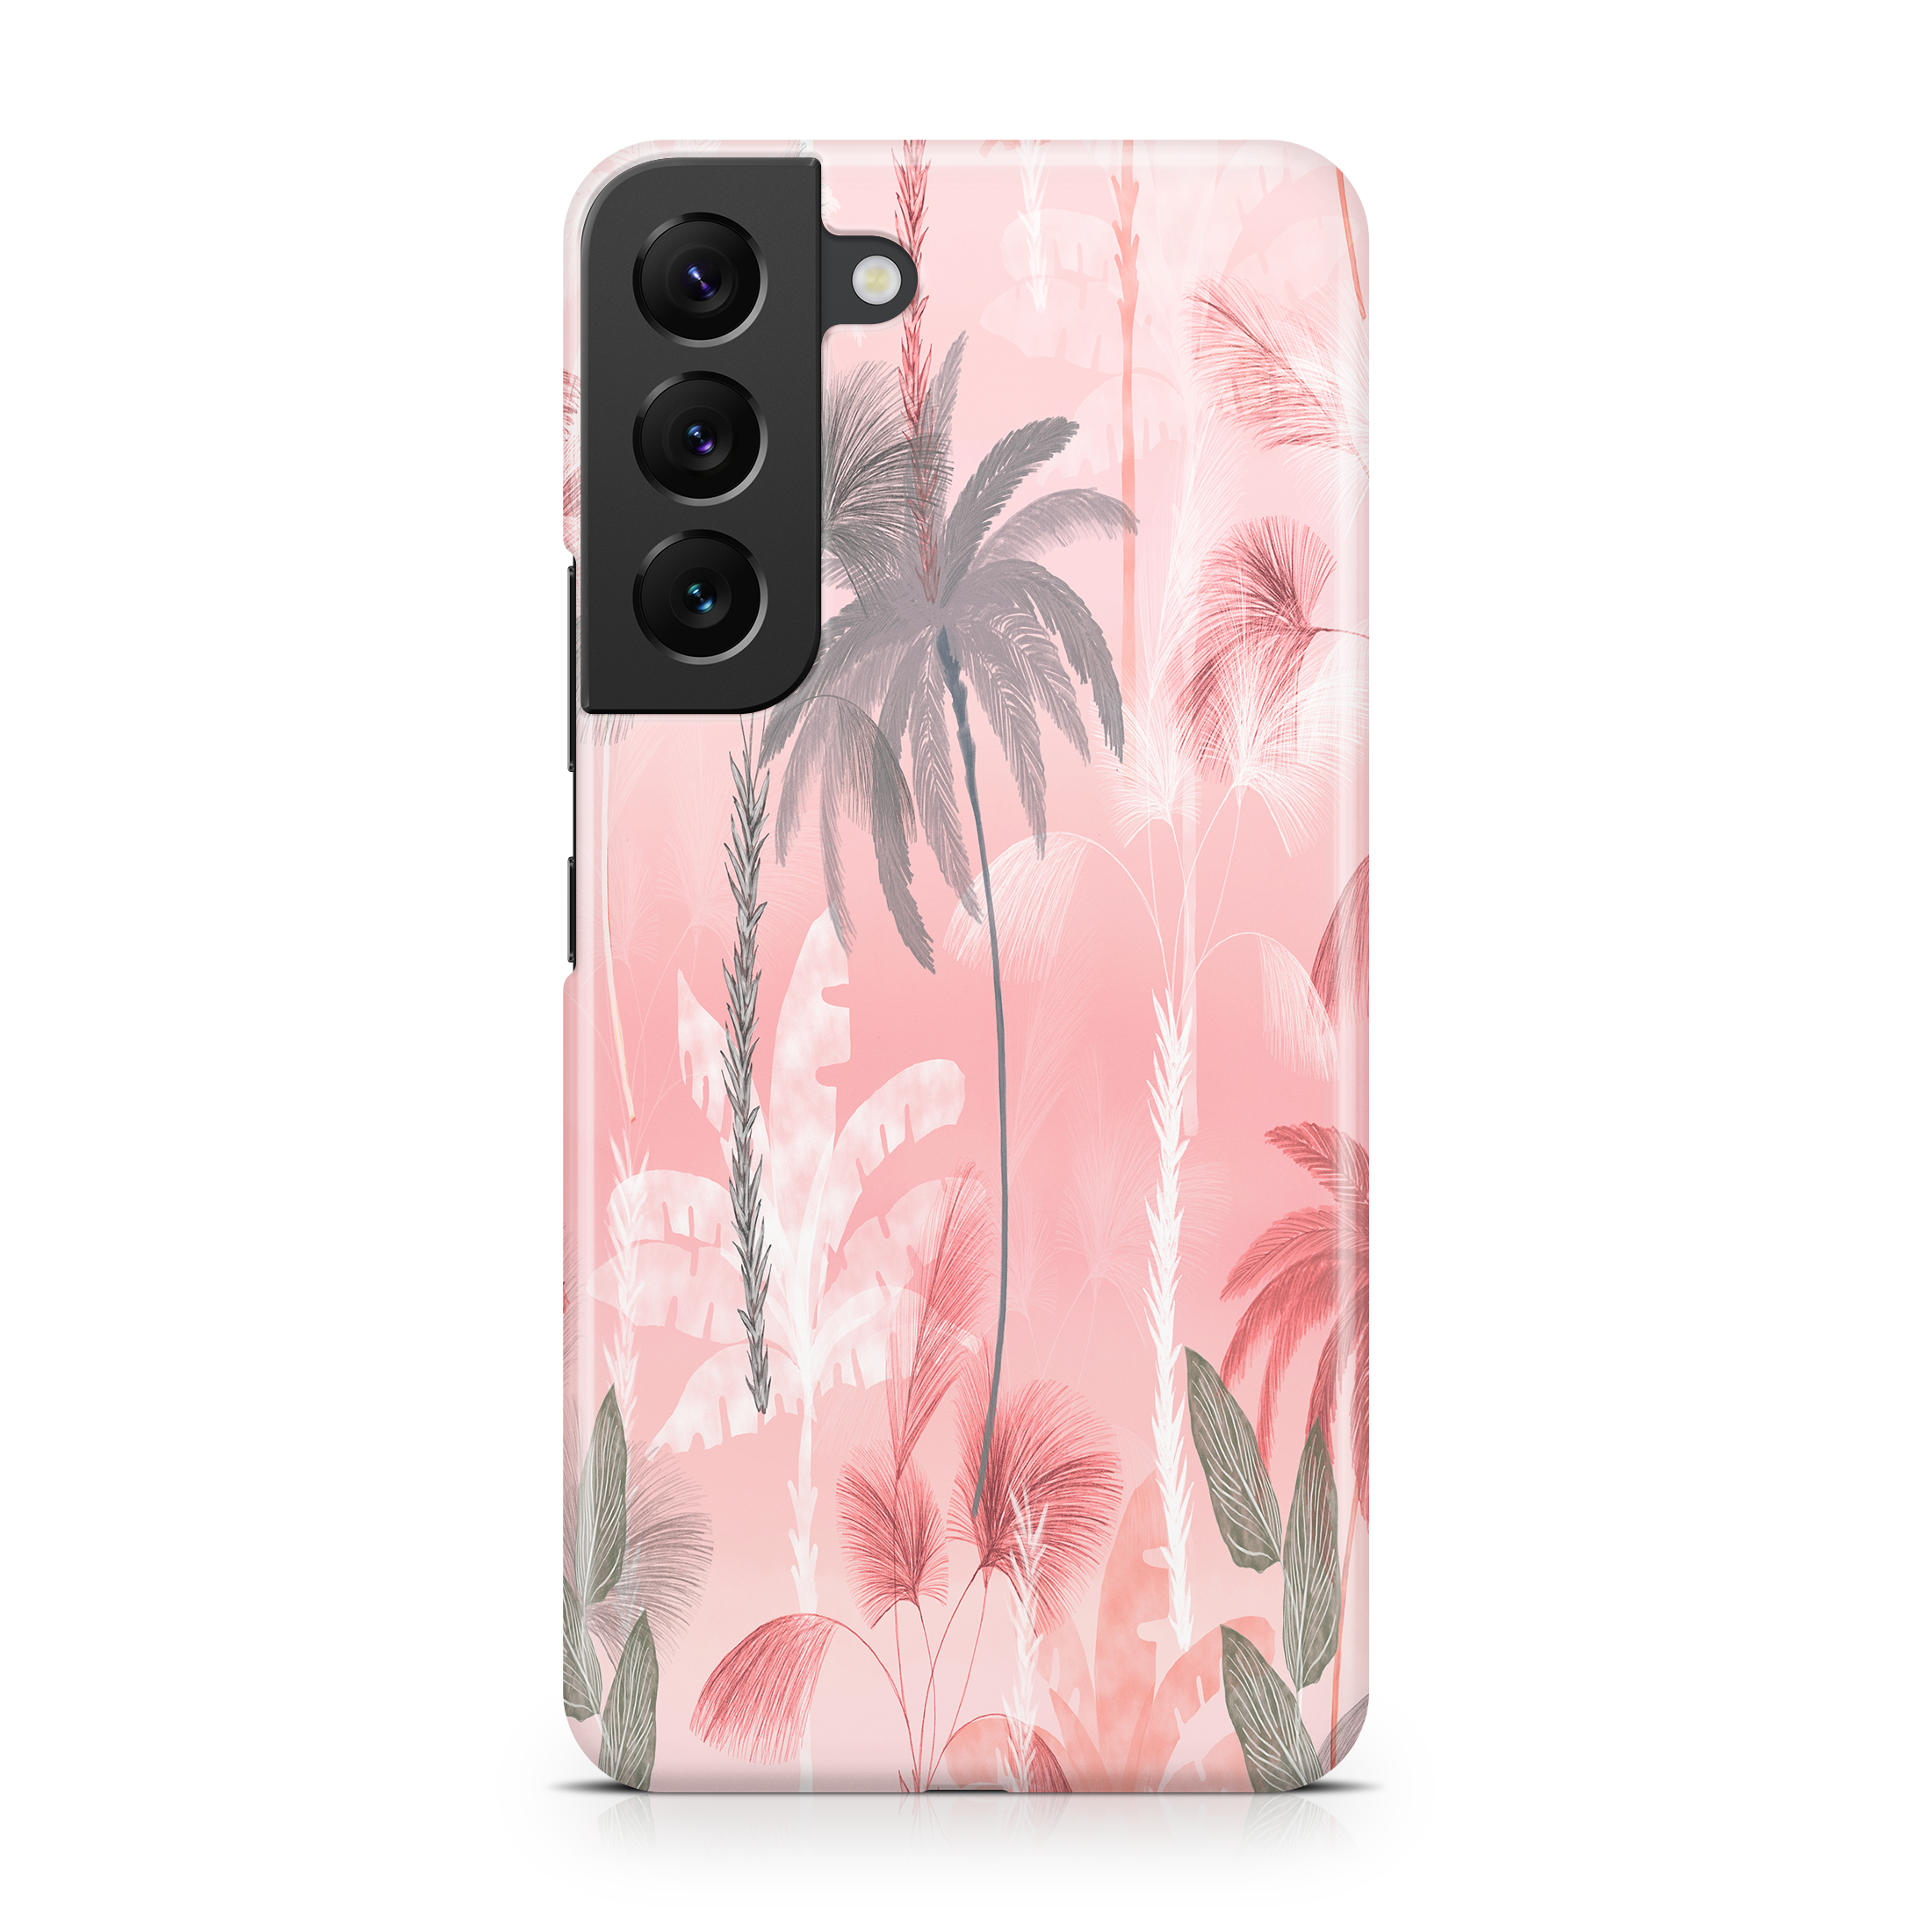 Smoothie Tropical - Samsung phone case designs by CaseSwagger